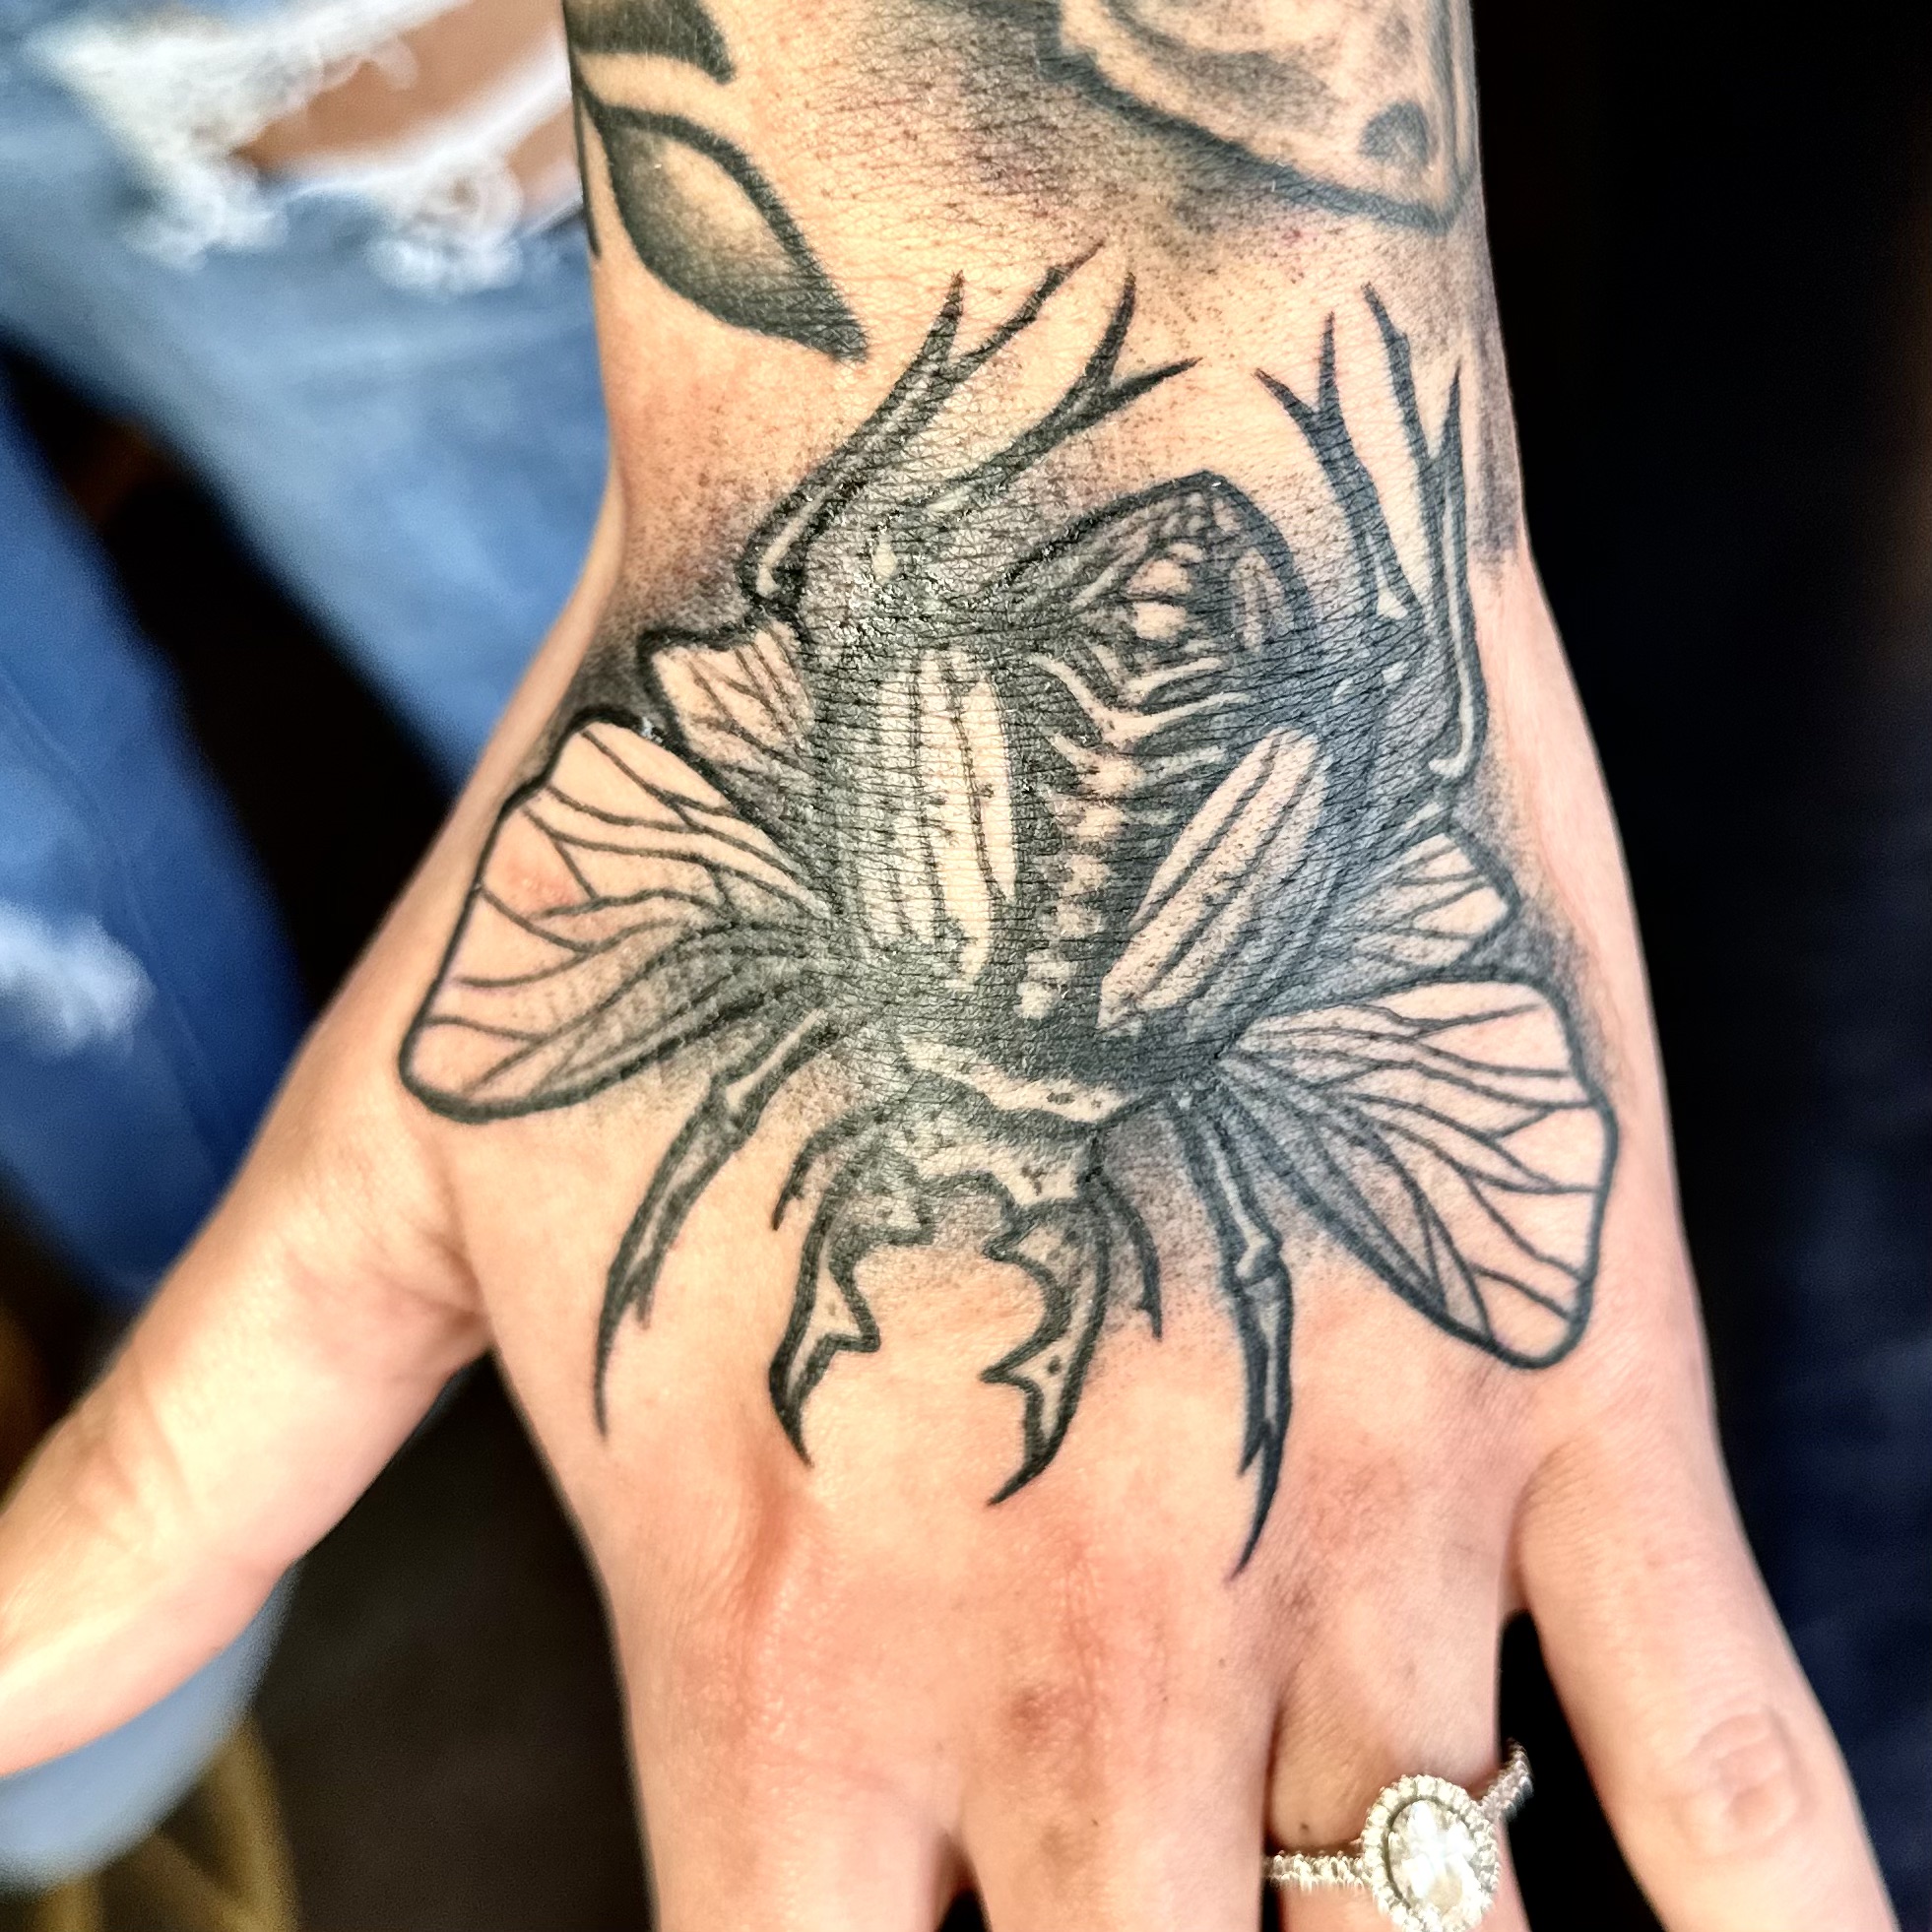 Tattoo of a bug on a hand from Dallas tattoo shop